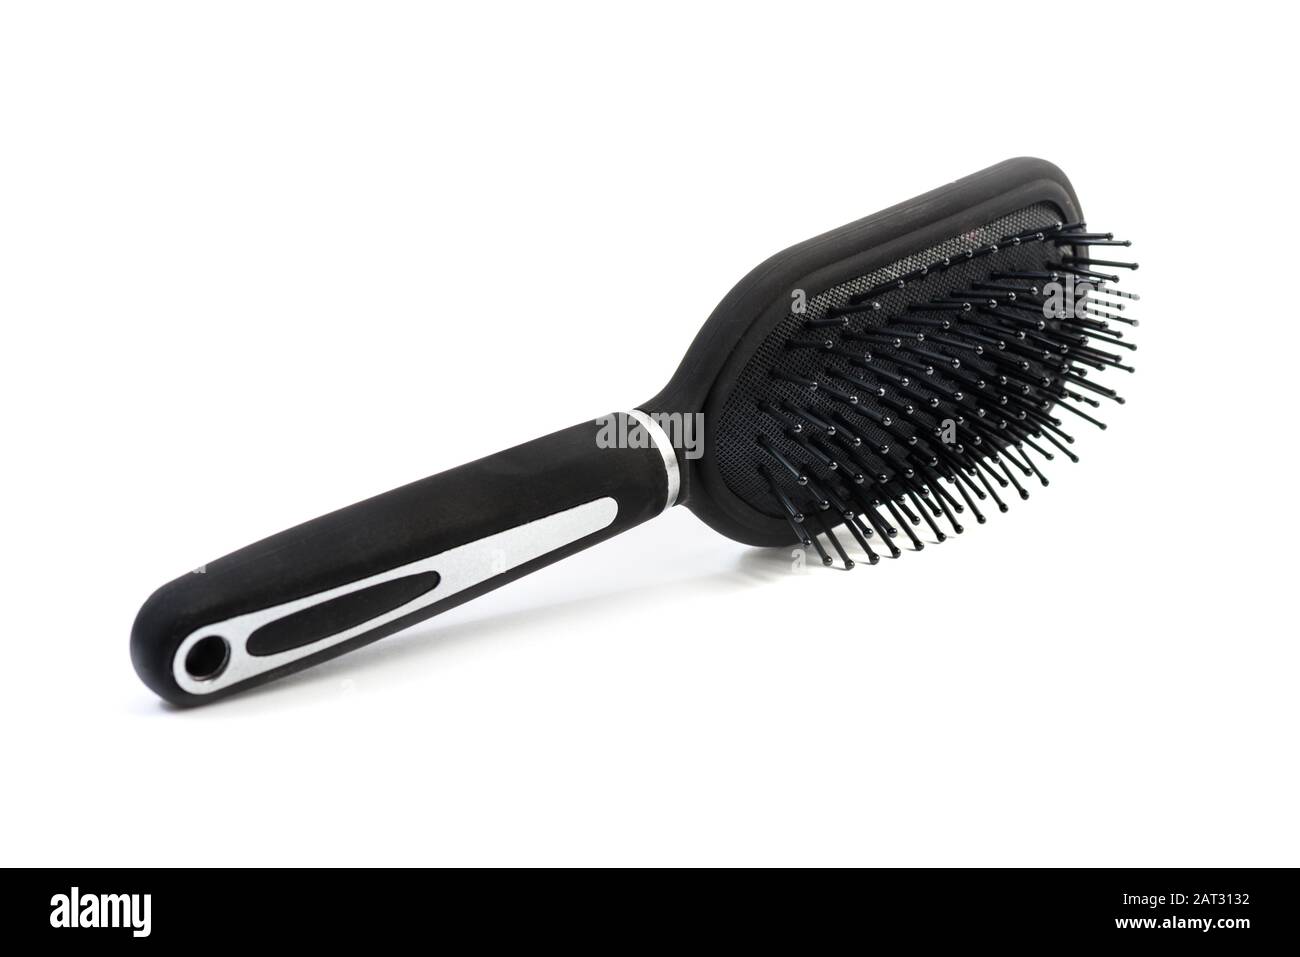 Hairbrush black and silver colored  isolated on white background Stock Photo